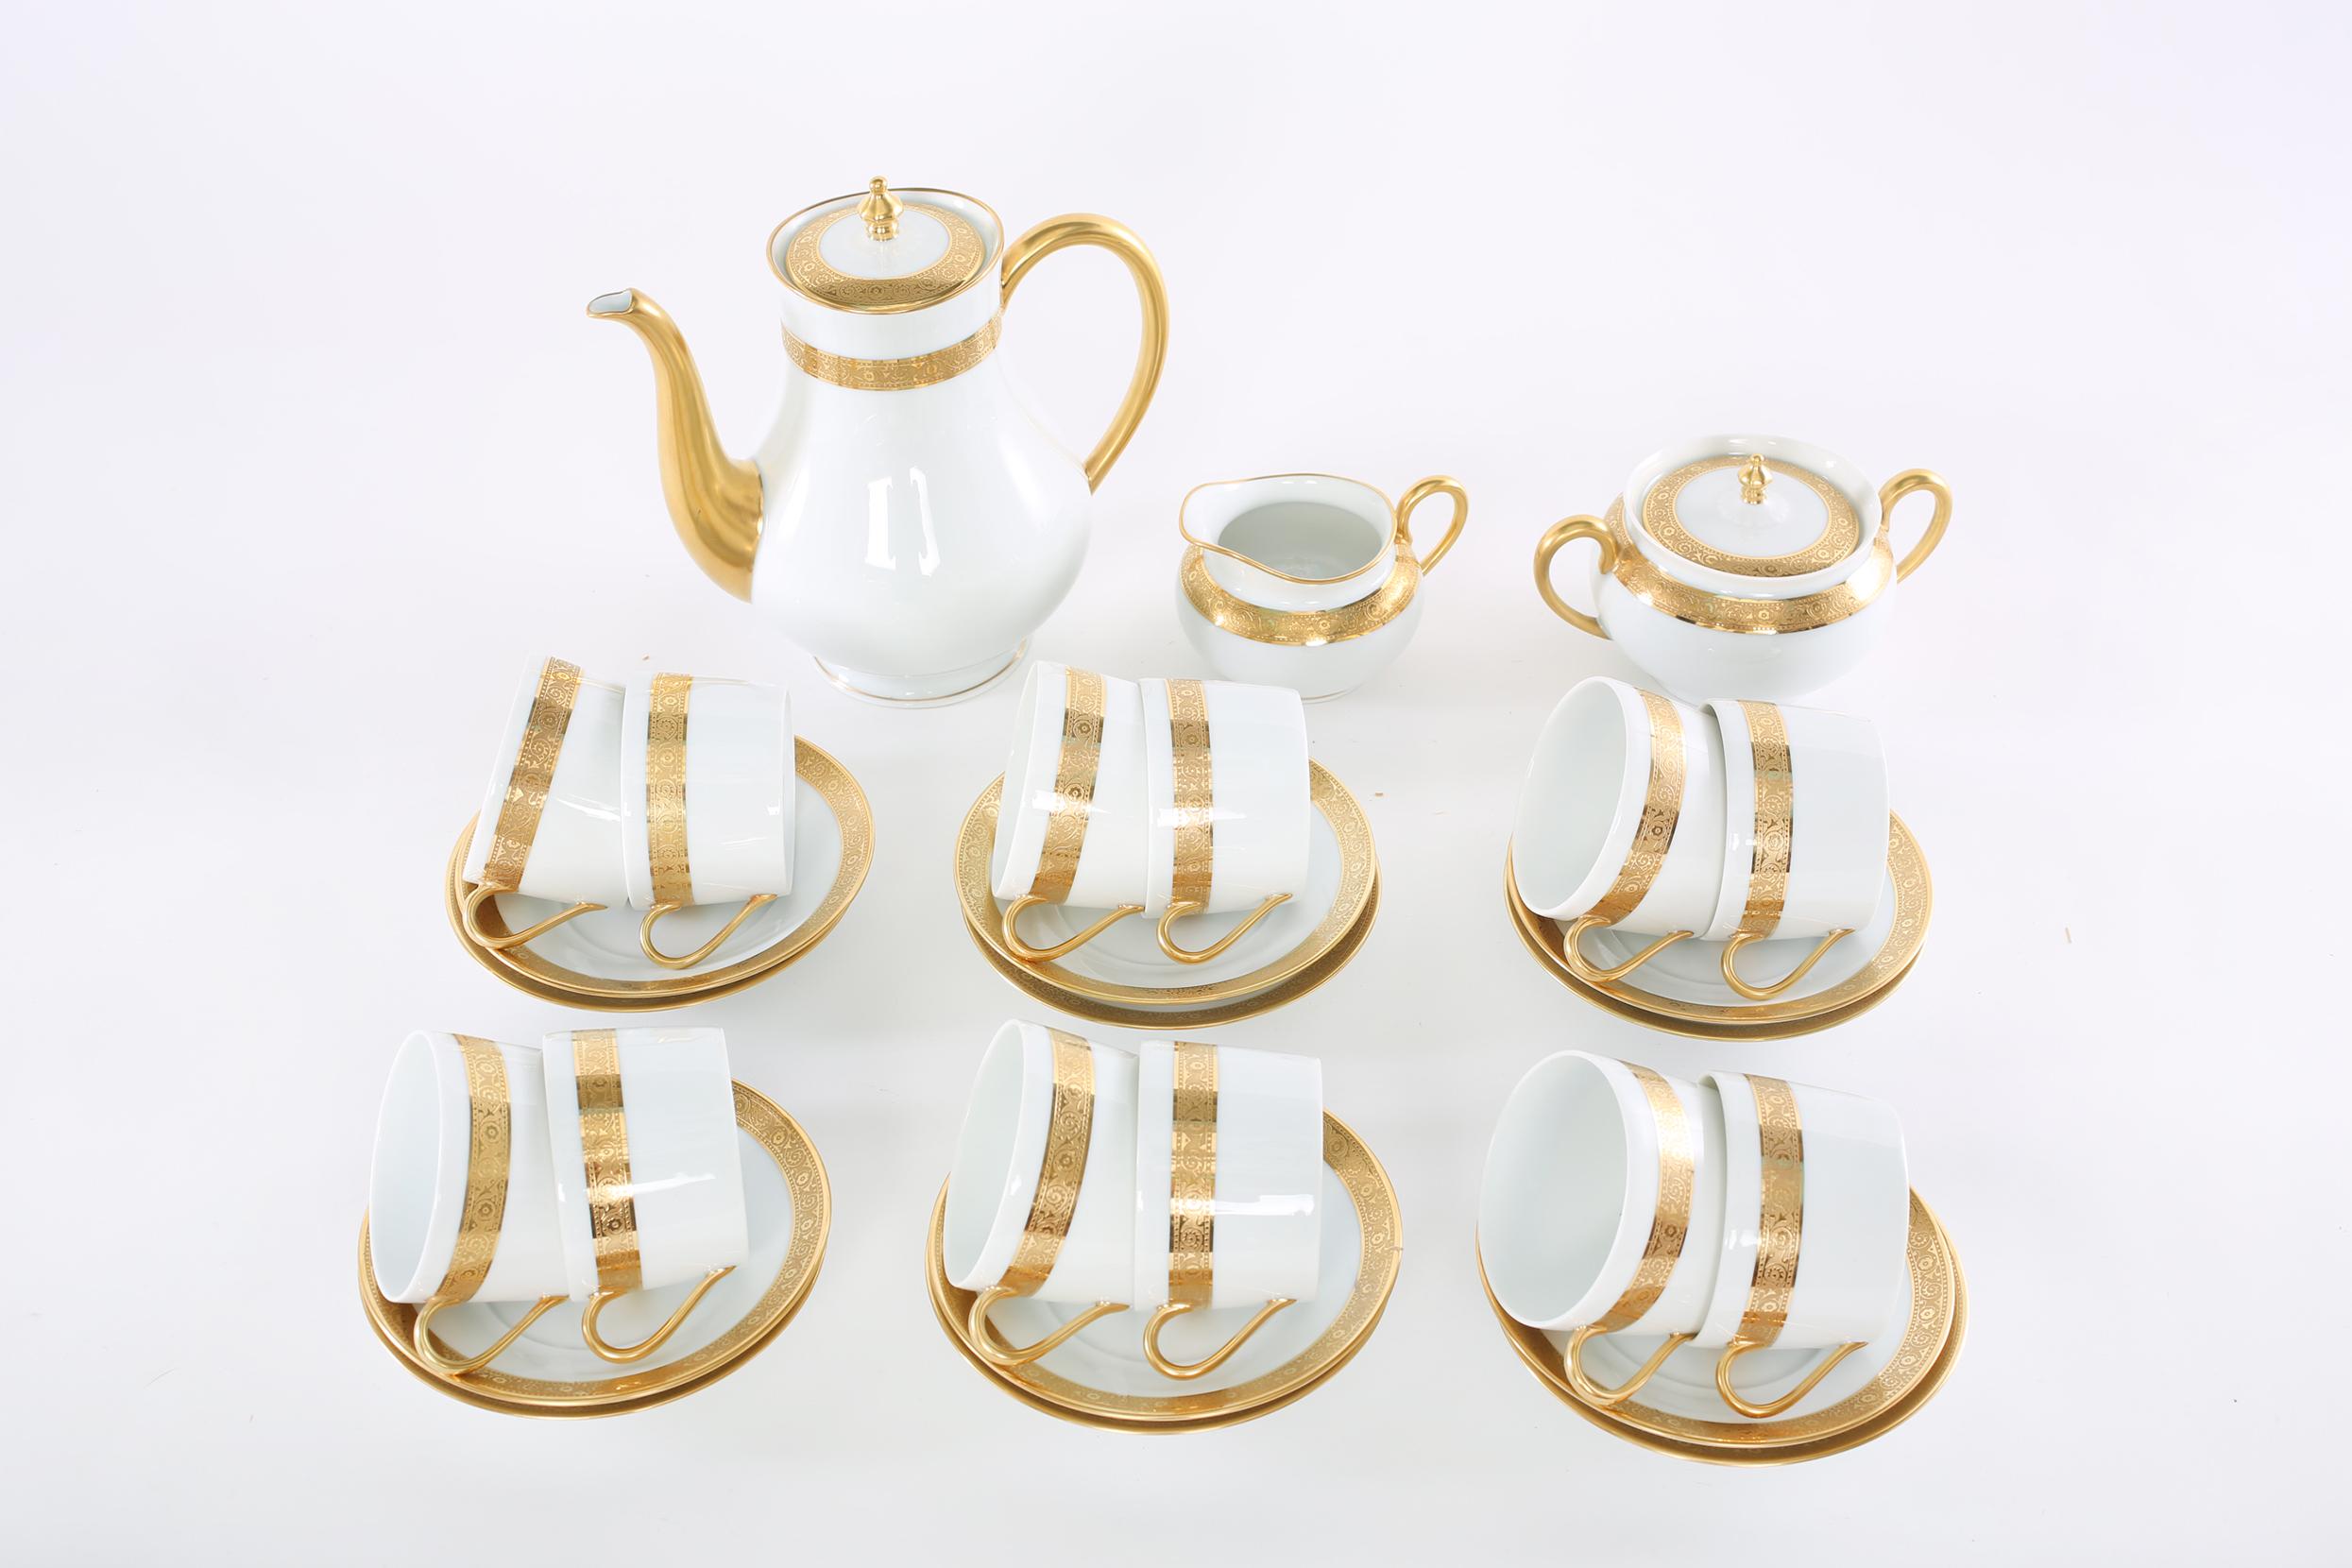 Late 20th century Haviland, Limoges France gilt porcelain tea / coffee service for twelve people. Each piece is great condition. Marks (Tower) Haviland Limoges, France undersigned. Alltogether 27 pieces. Set include 12 tea / coffee cups 4